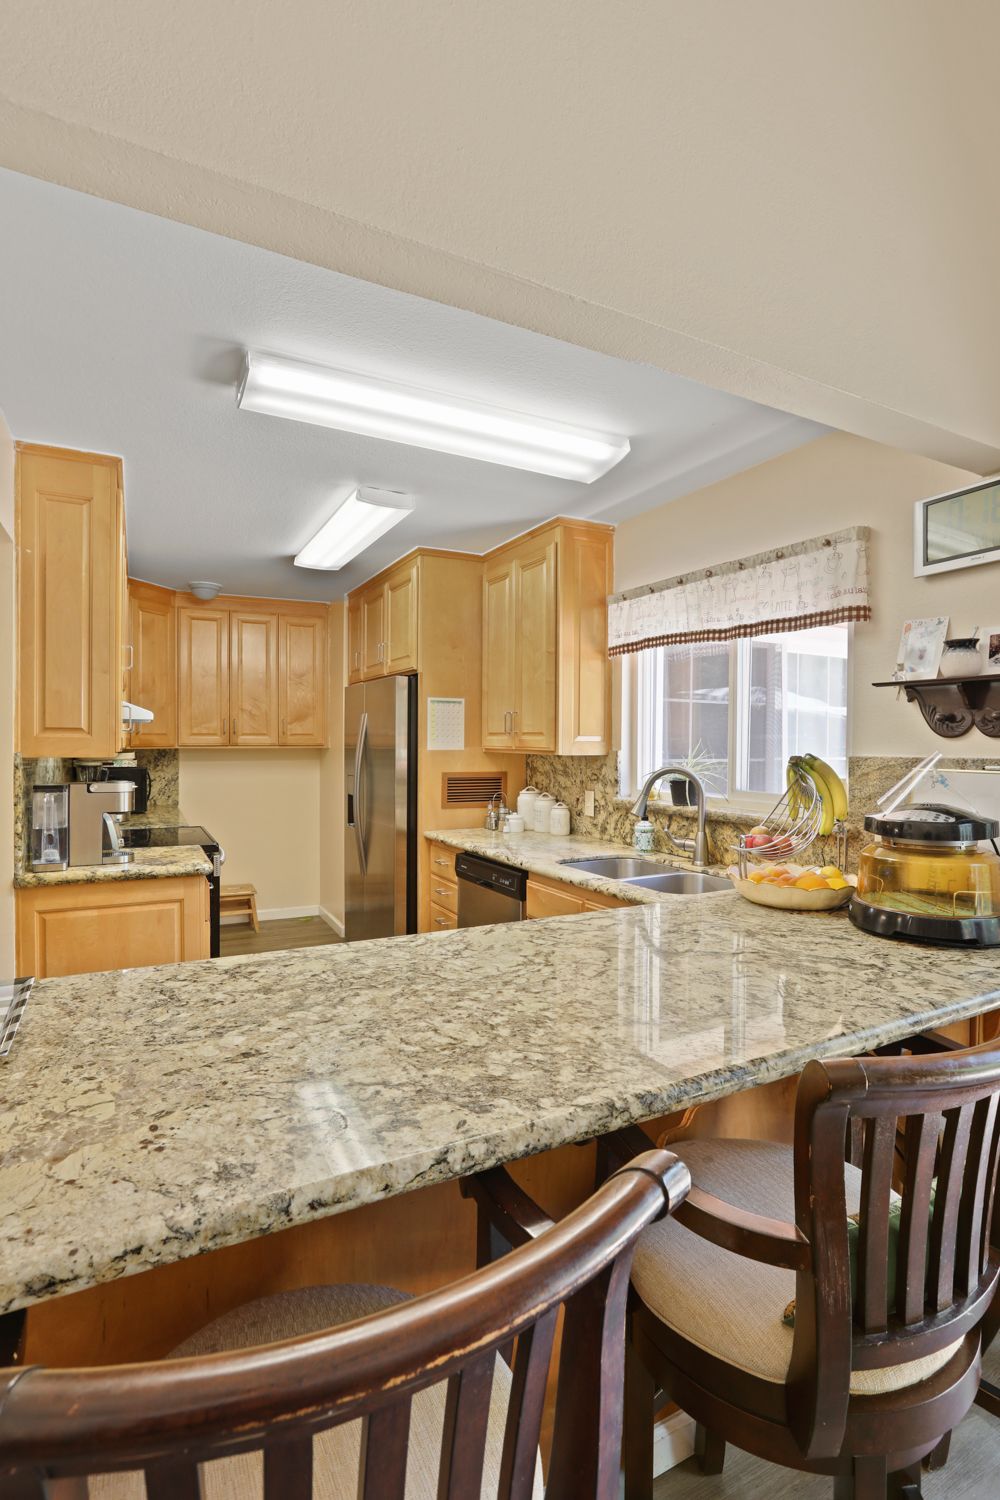 Interior view of Robert Creek Villa senior living community featuring a well-designed kitchen and dining area.